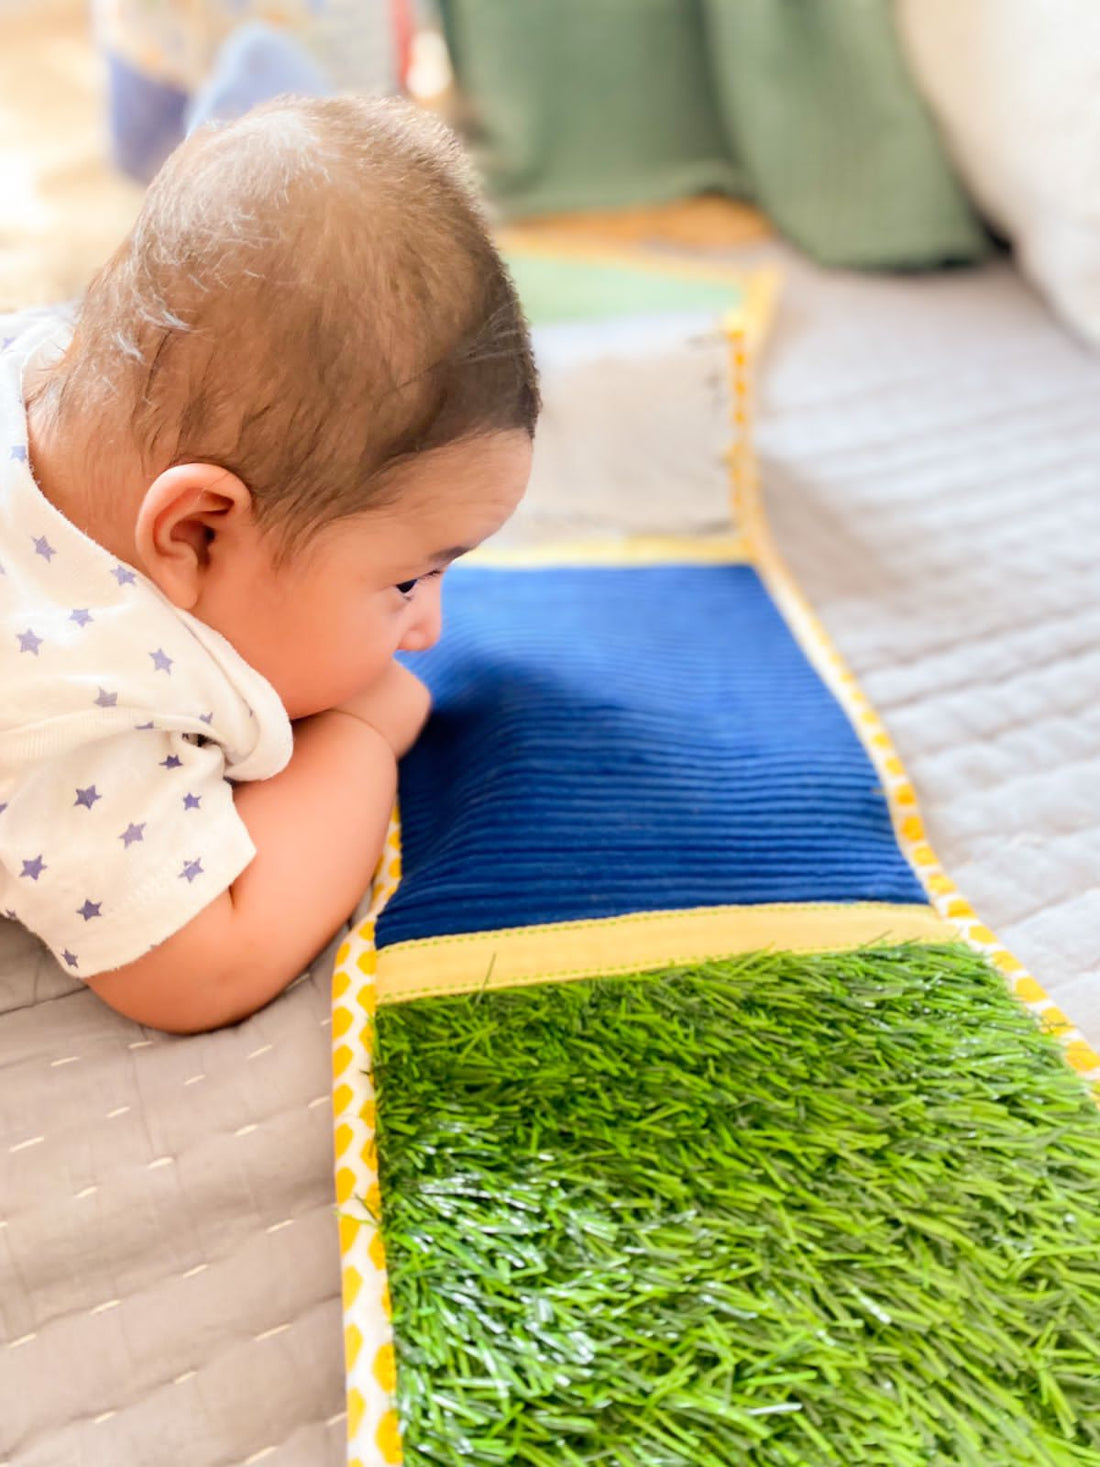 Sensory Play in Early Childhood: An Incessant Grooming Journey